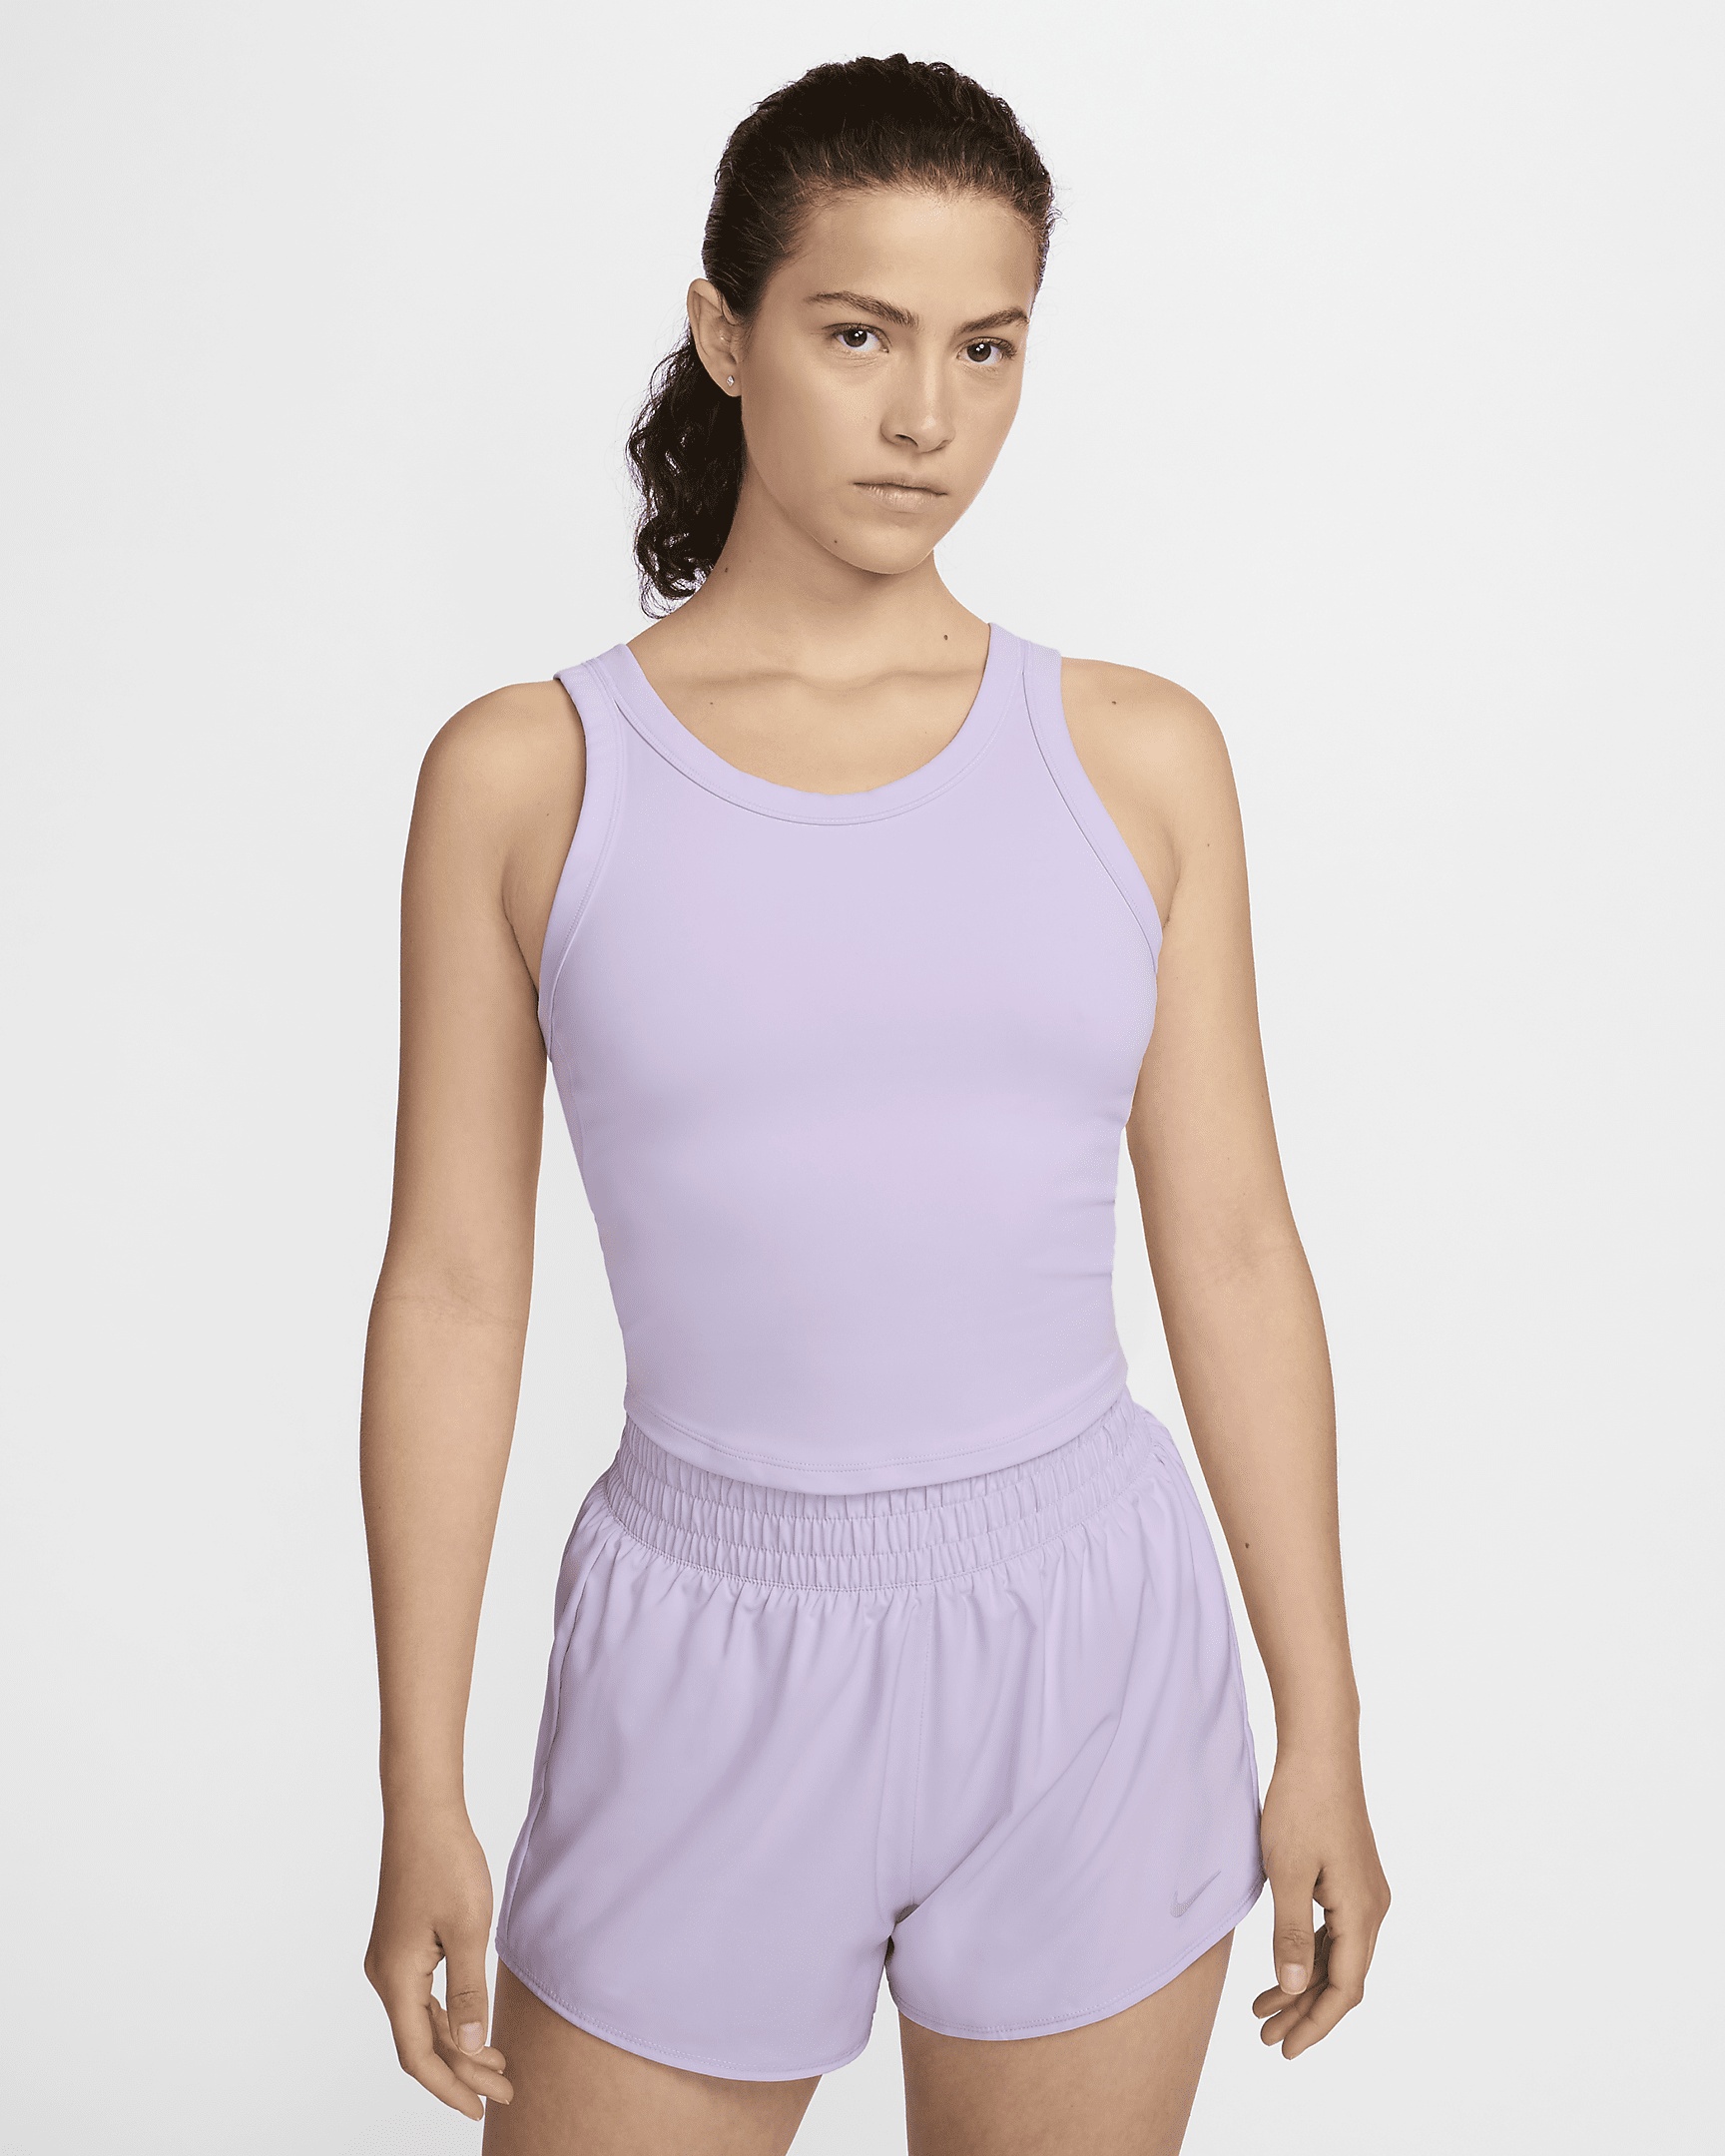 Nike Women's One Fitted Dri-FIT Strappy Cropped Tank Top - 1